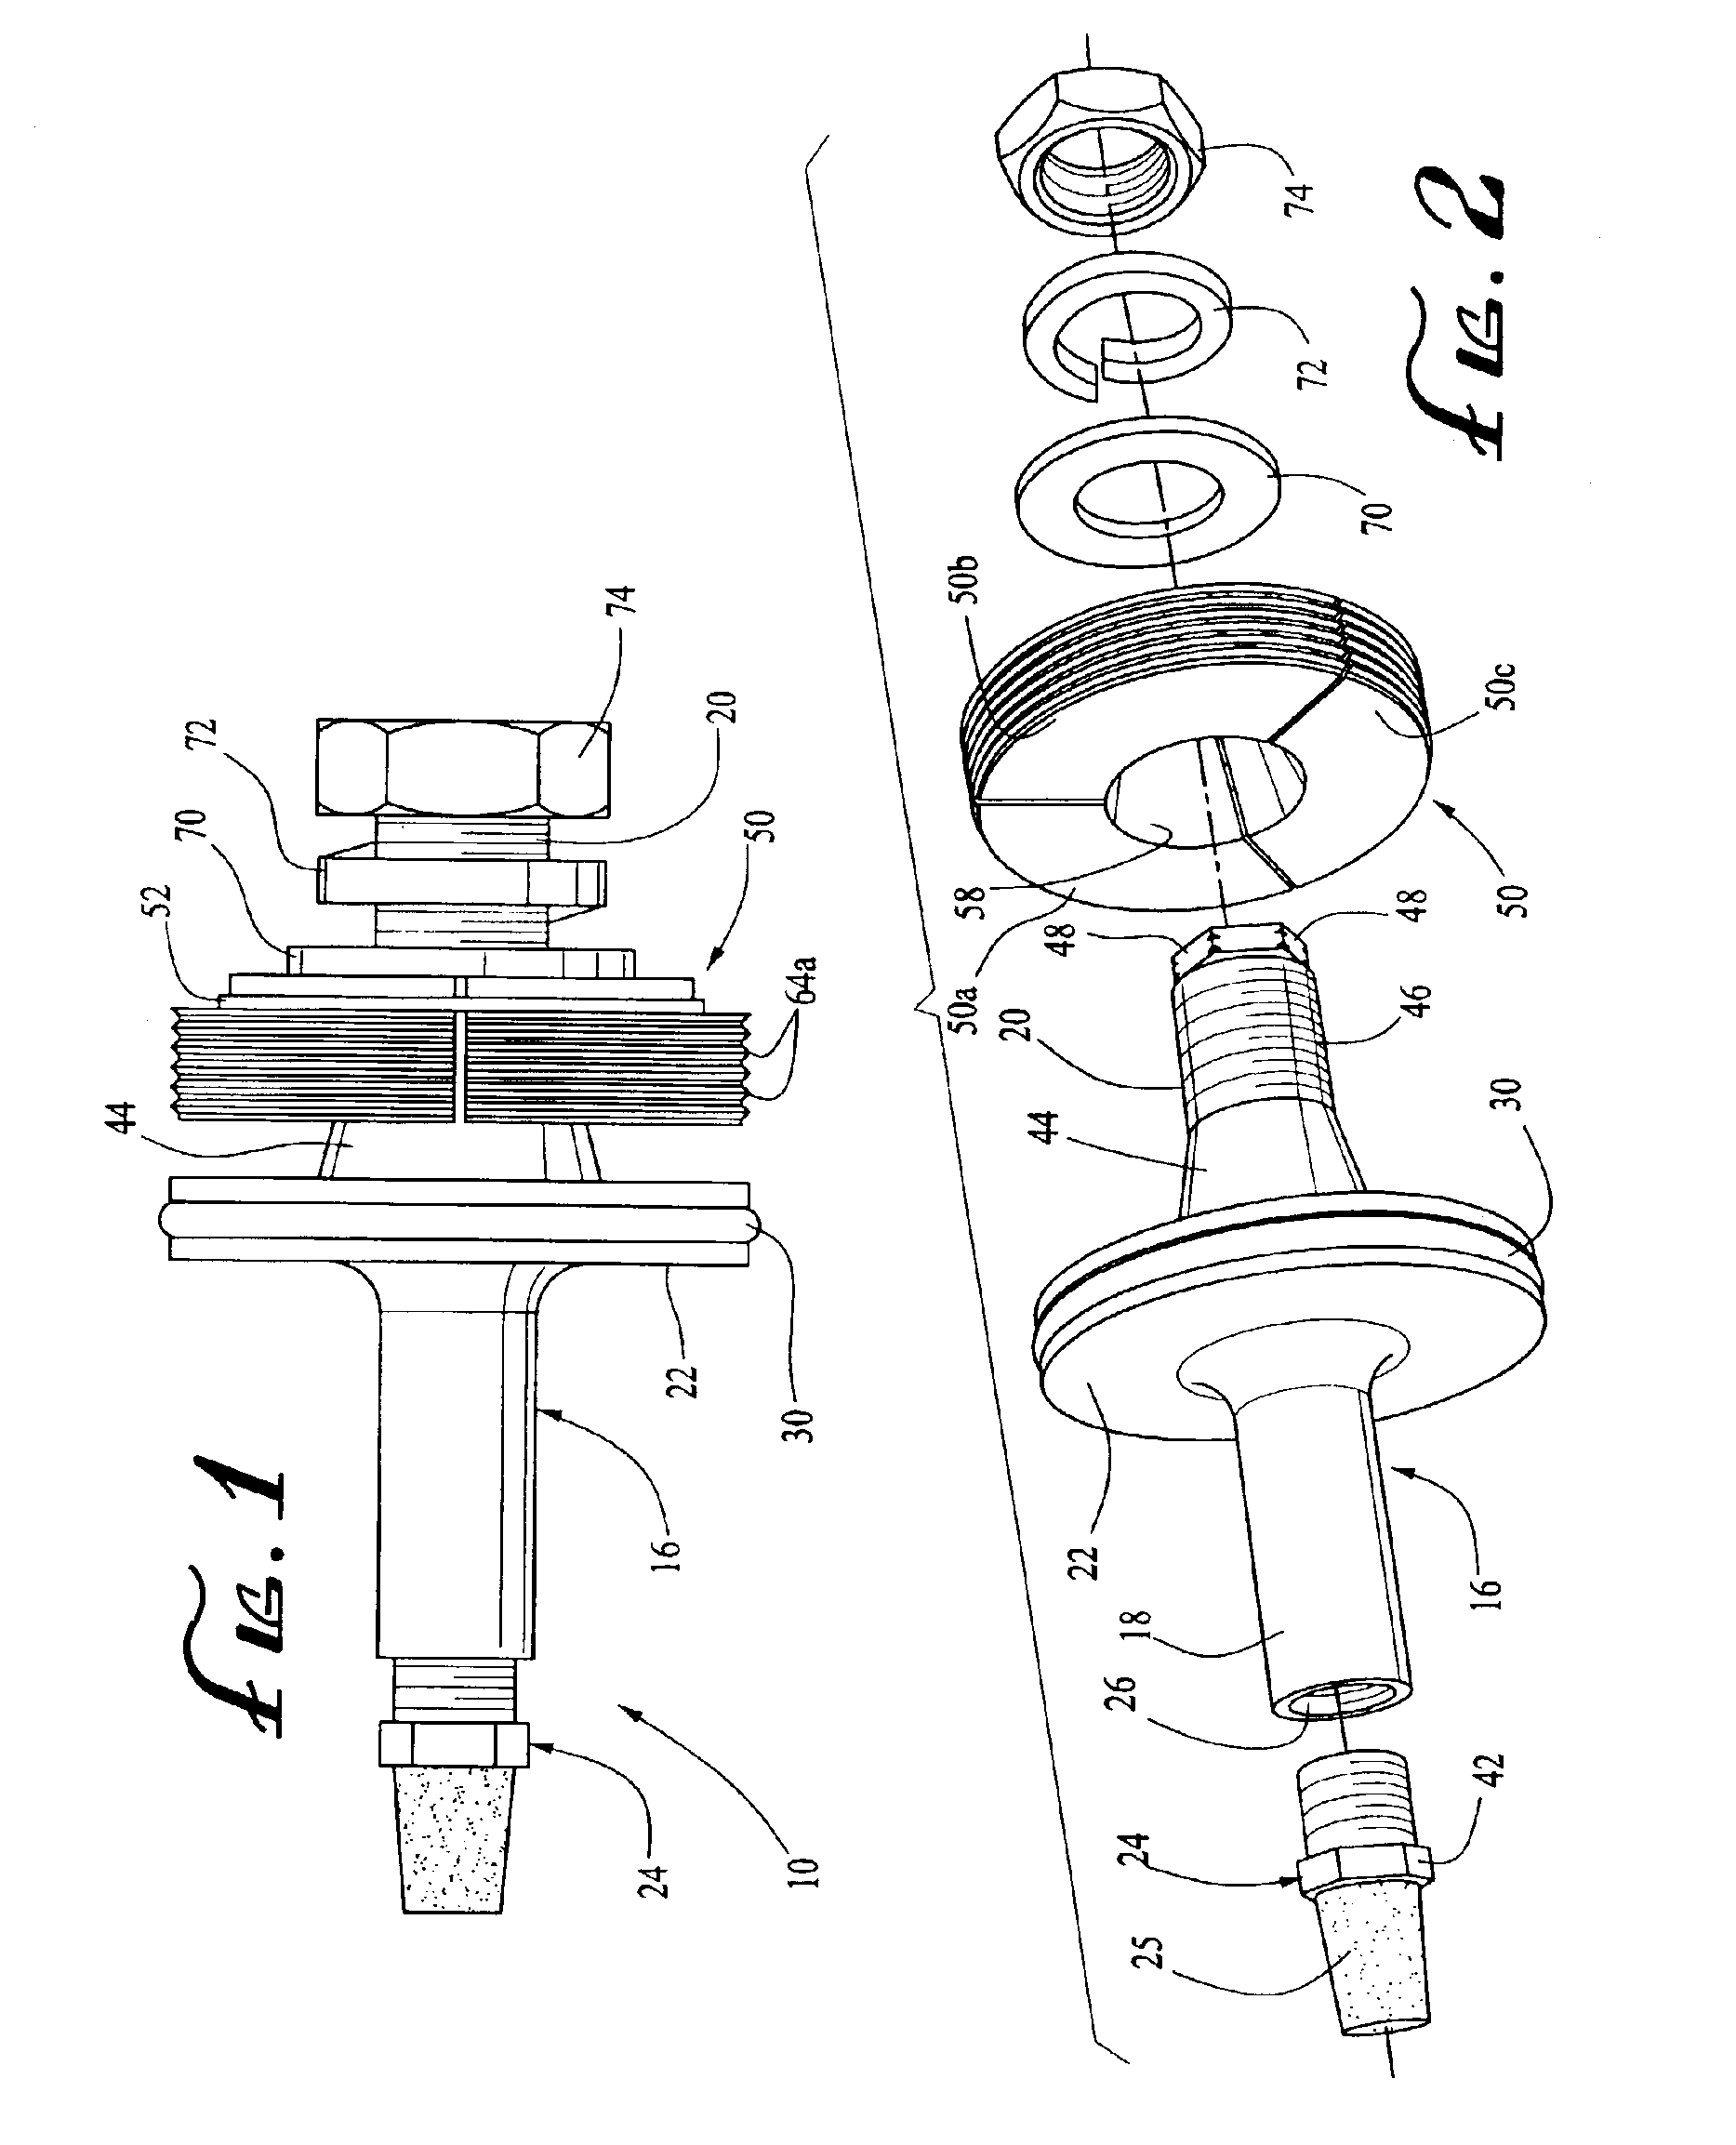 Expandable spindle plug assembly for use with automatic tire inflation systems